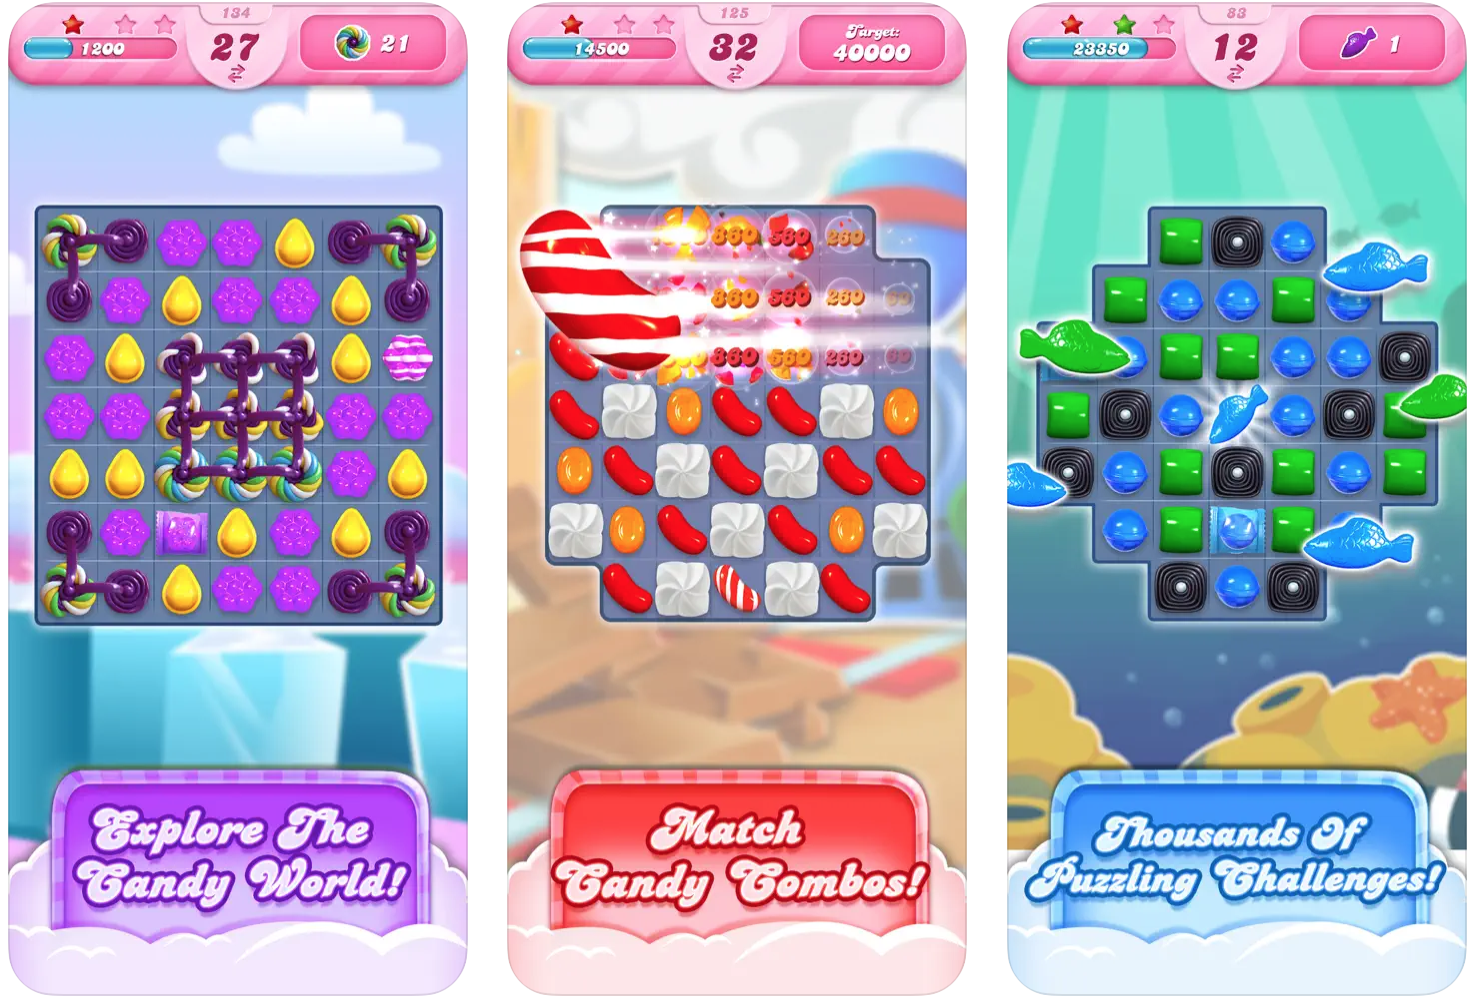 Nation's favourite mobile phone games are Roblox and Candy Crush